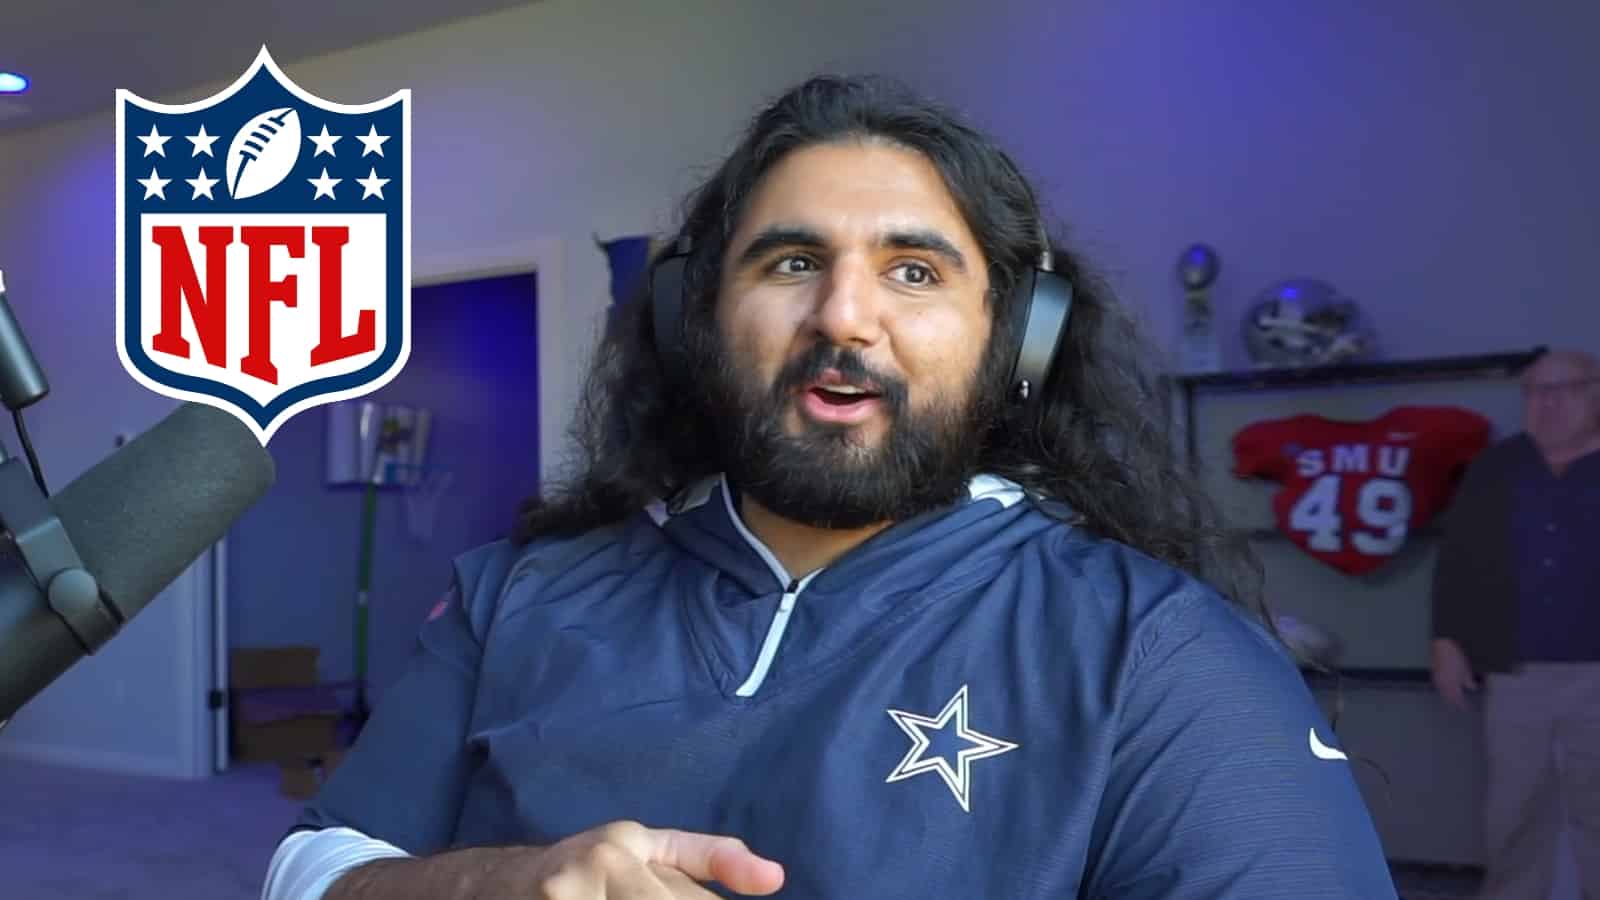 Esfand reveals plan to stream NFL on Twitch after landing big deal